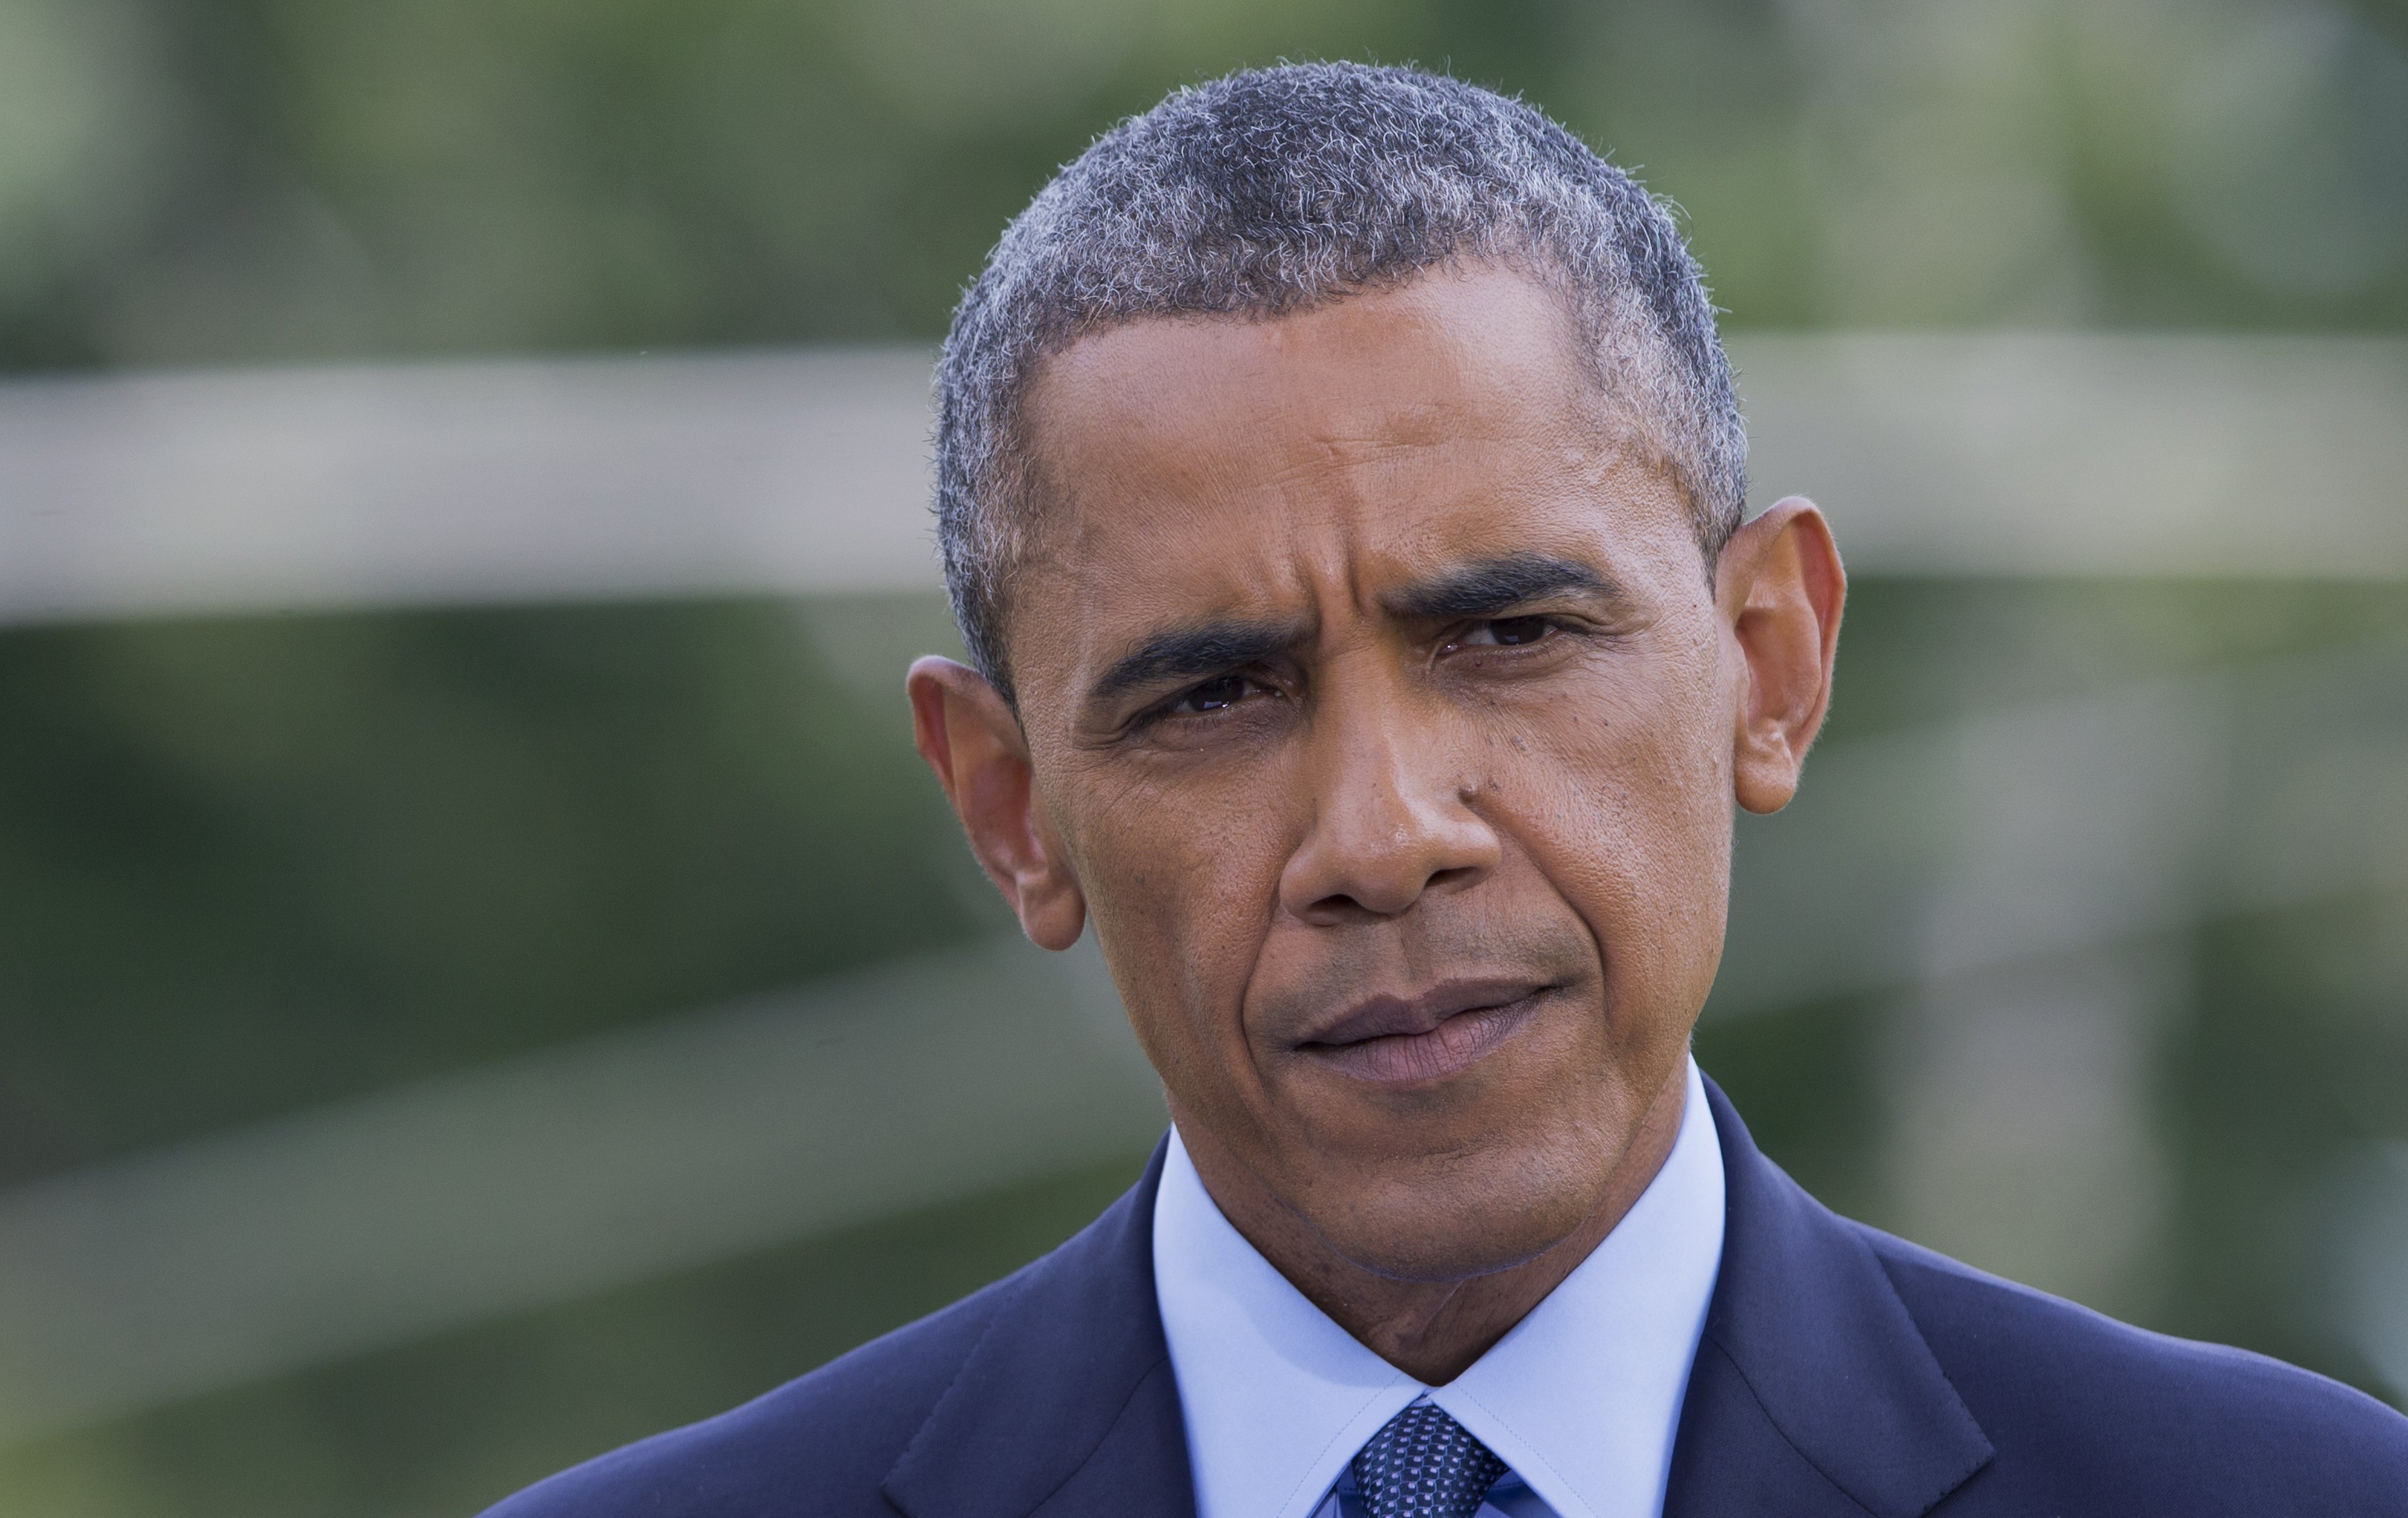 President Barack Obama pauses, as he announces new economic sanctions against key sectors of the Russian economy in the latest move by the U.S. to force Russian President Vladimir Putin to end his support for Ukrainian rebels, on the South Lawn of the White House in Washington on July 29, 2014. (Manuel Balce Ceneta—AP)